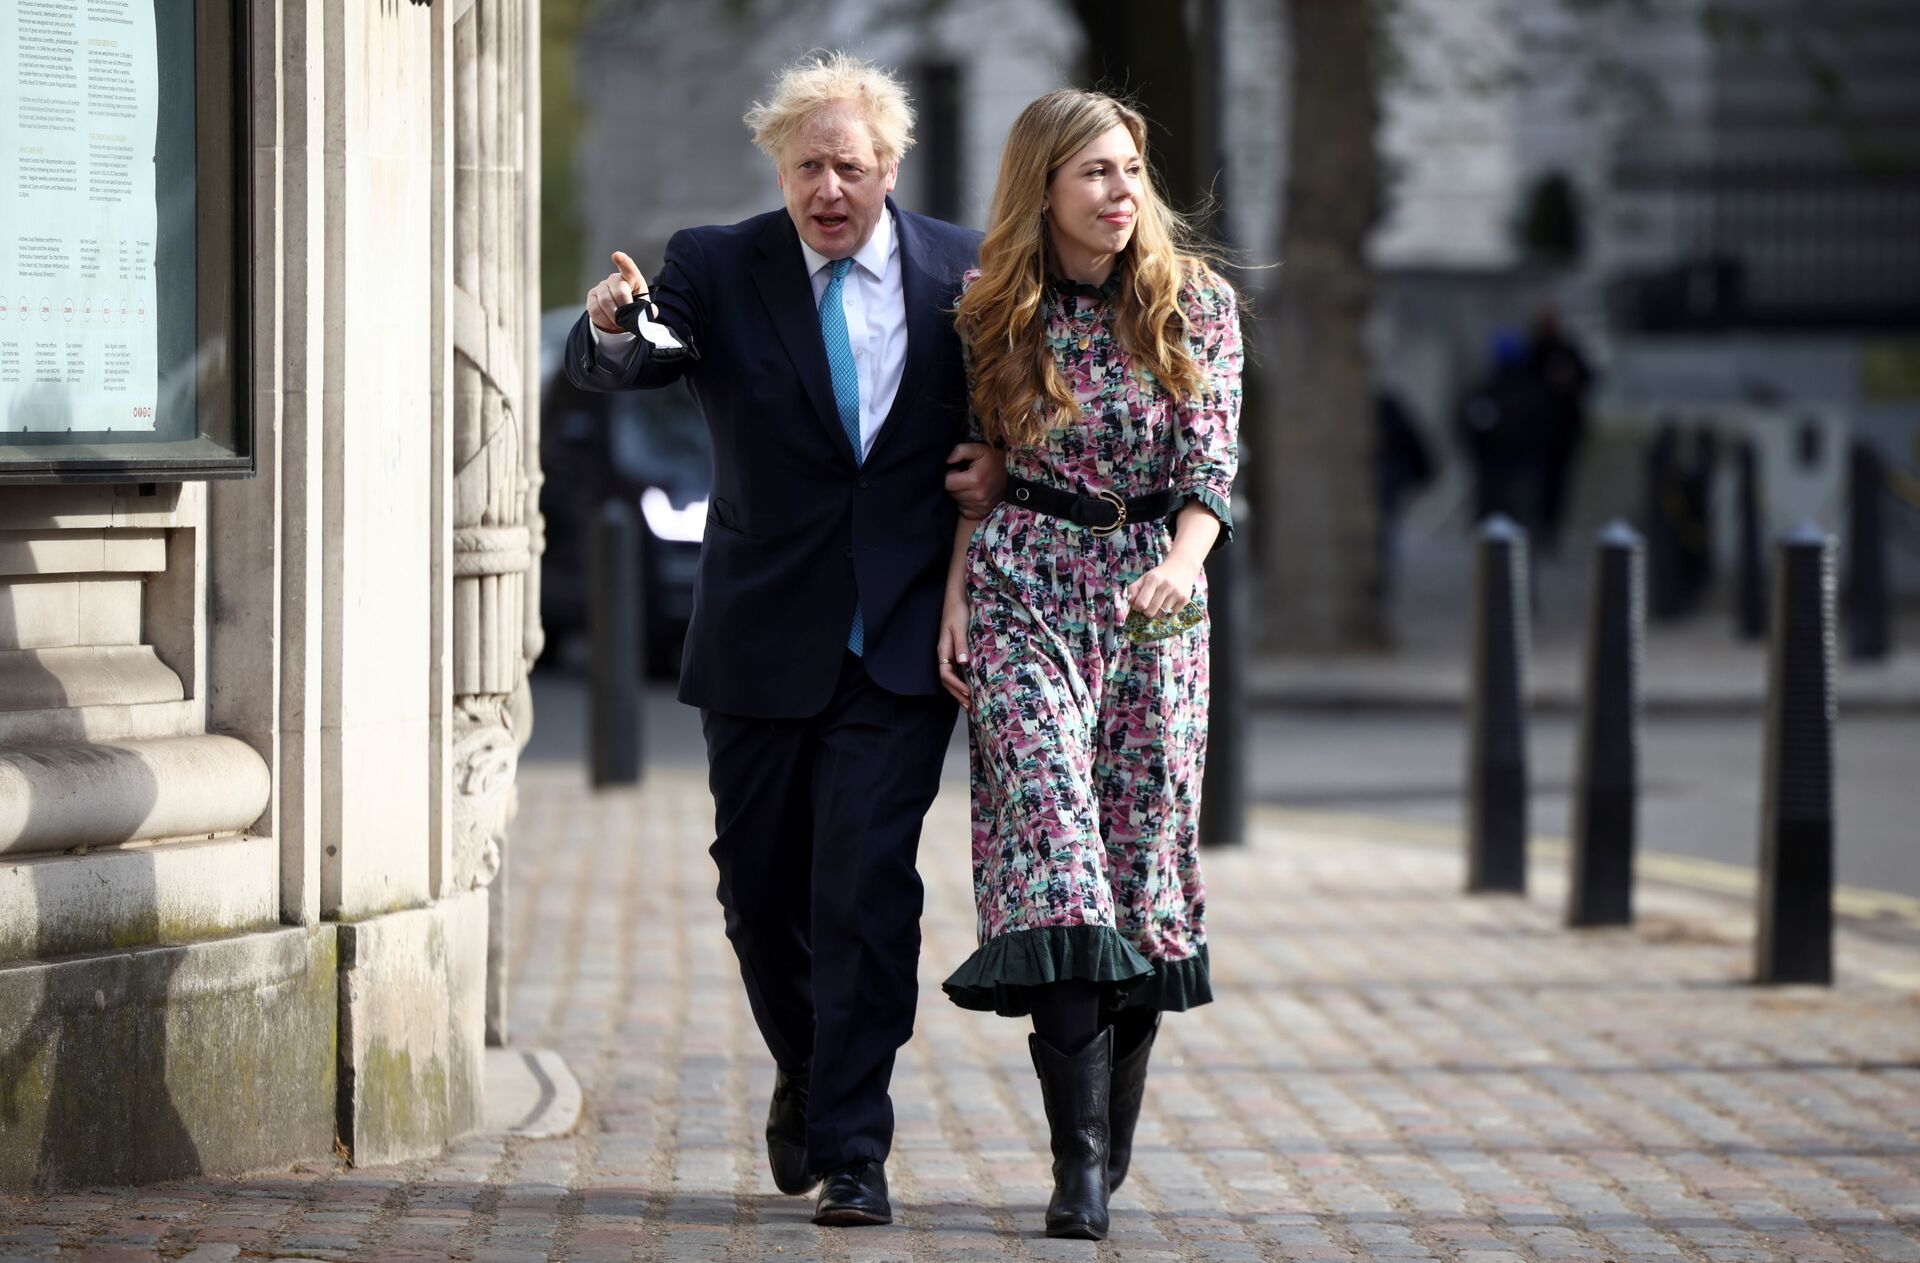 Britain's Prime Minister Boris Johnson and partner Carrie Symonds arrive at the Methodist Central Hall to vote, in London, Britain May 6, 2021 - Sputnik International, 1920, 07.09.2021